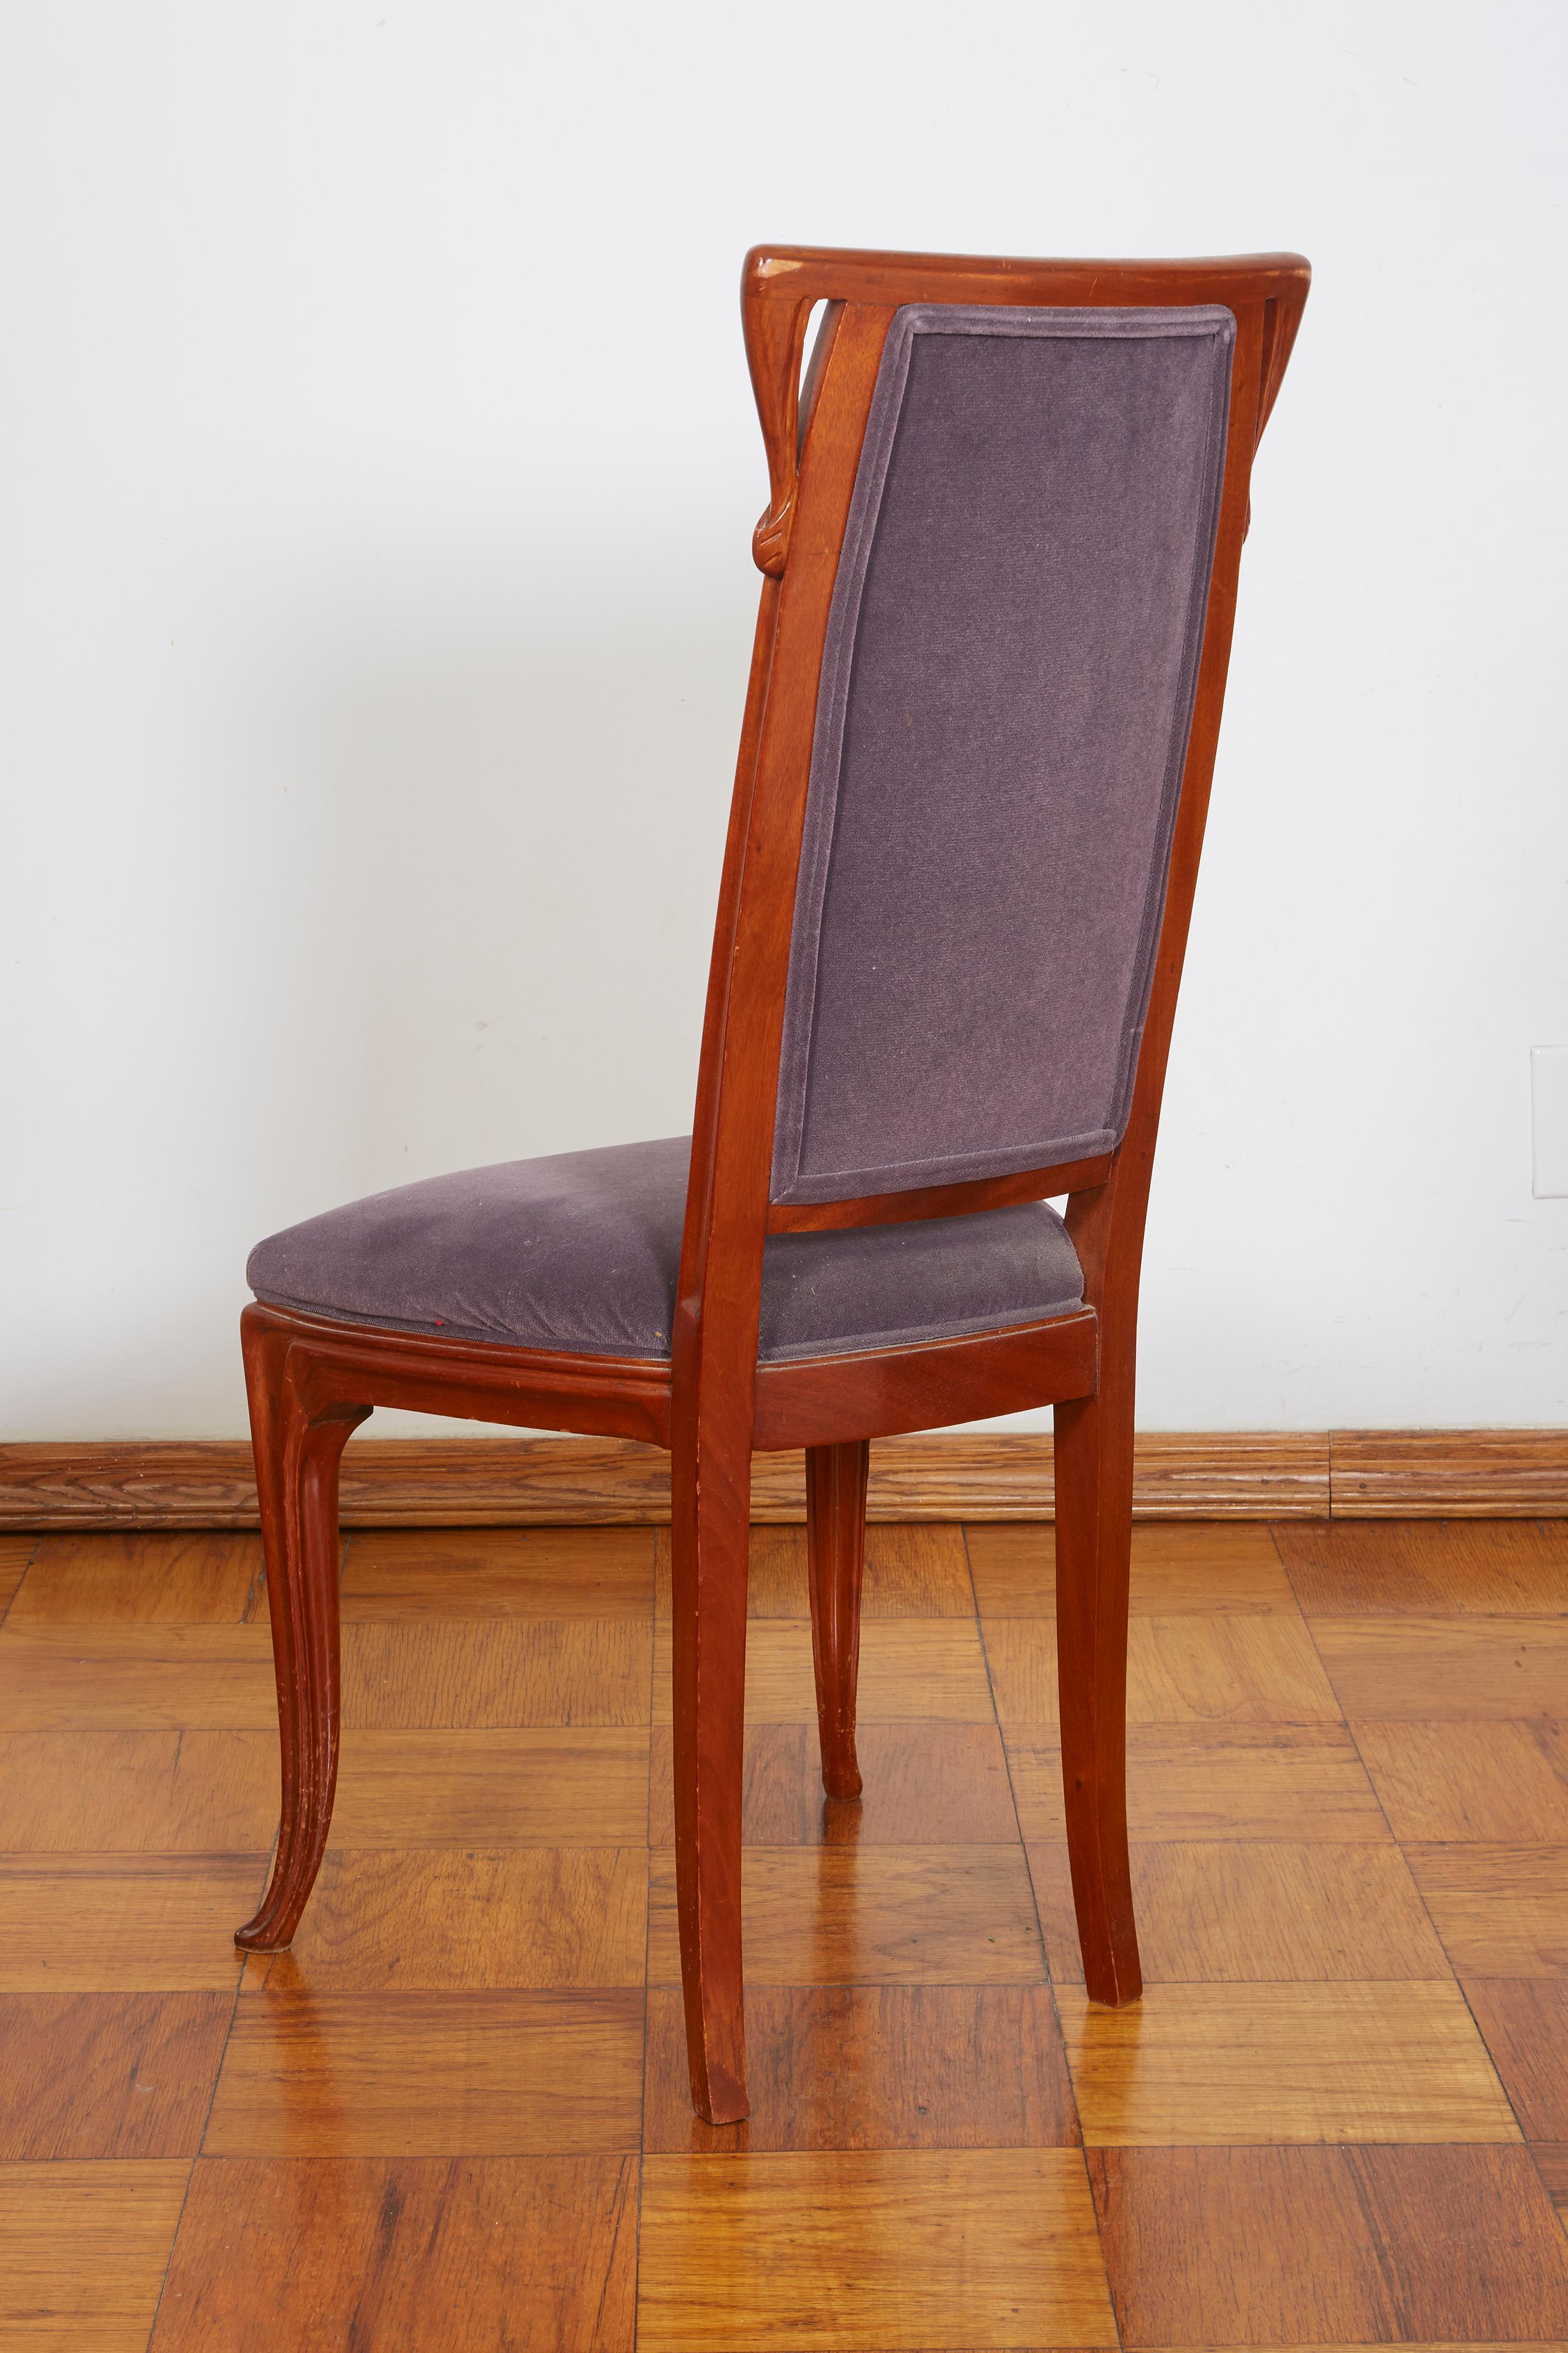 20th Century French Art Nouveau Chairs by Louis Majorelle For Sale